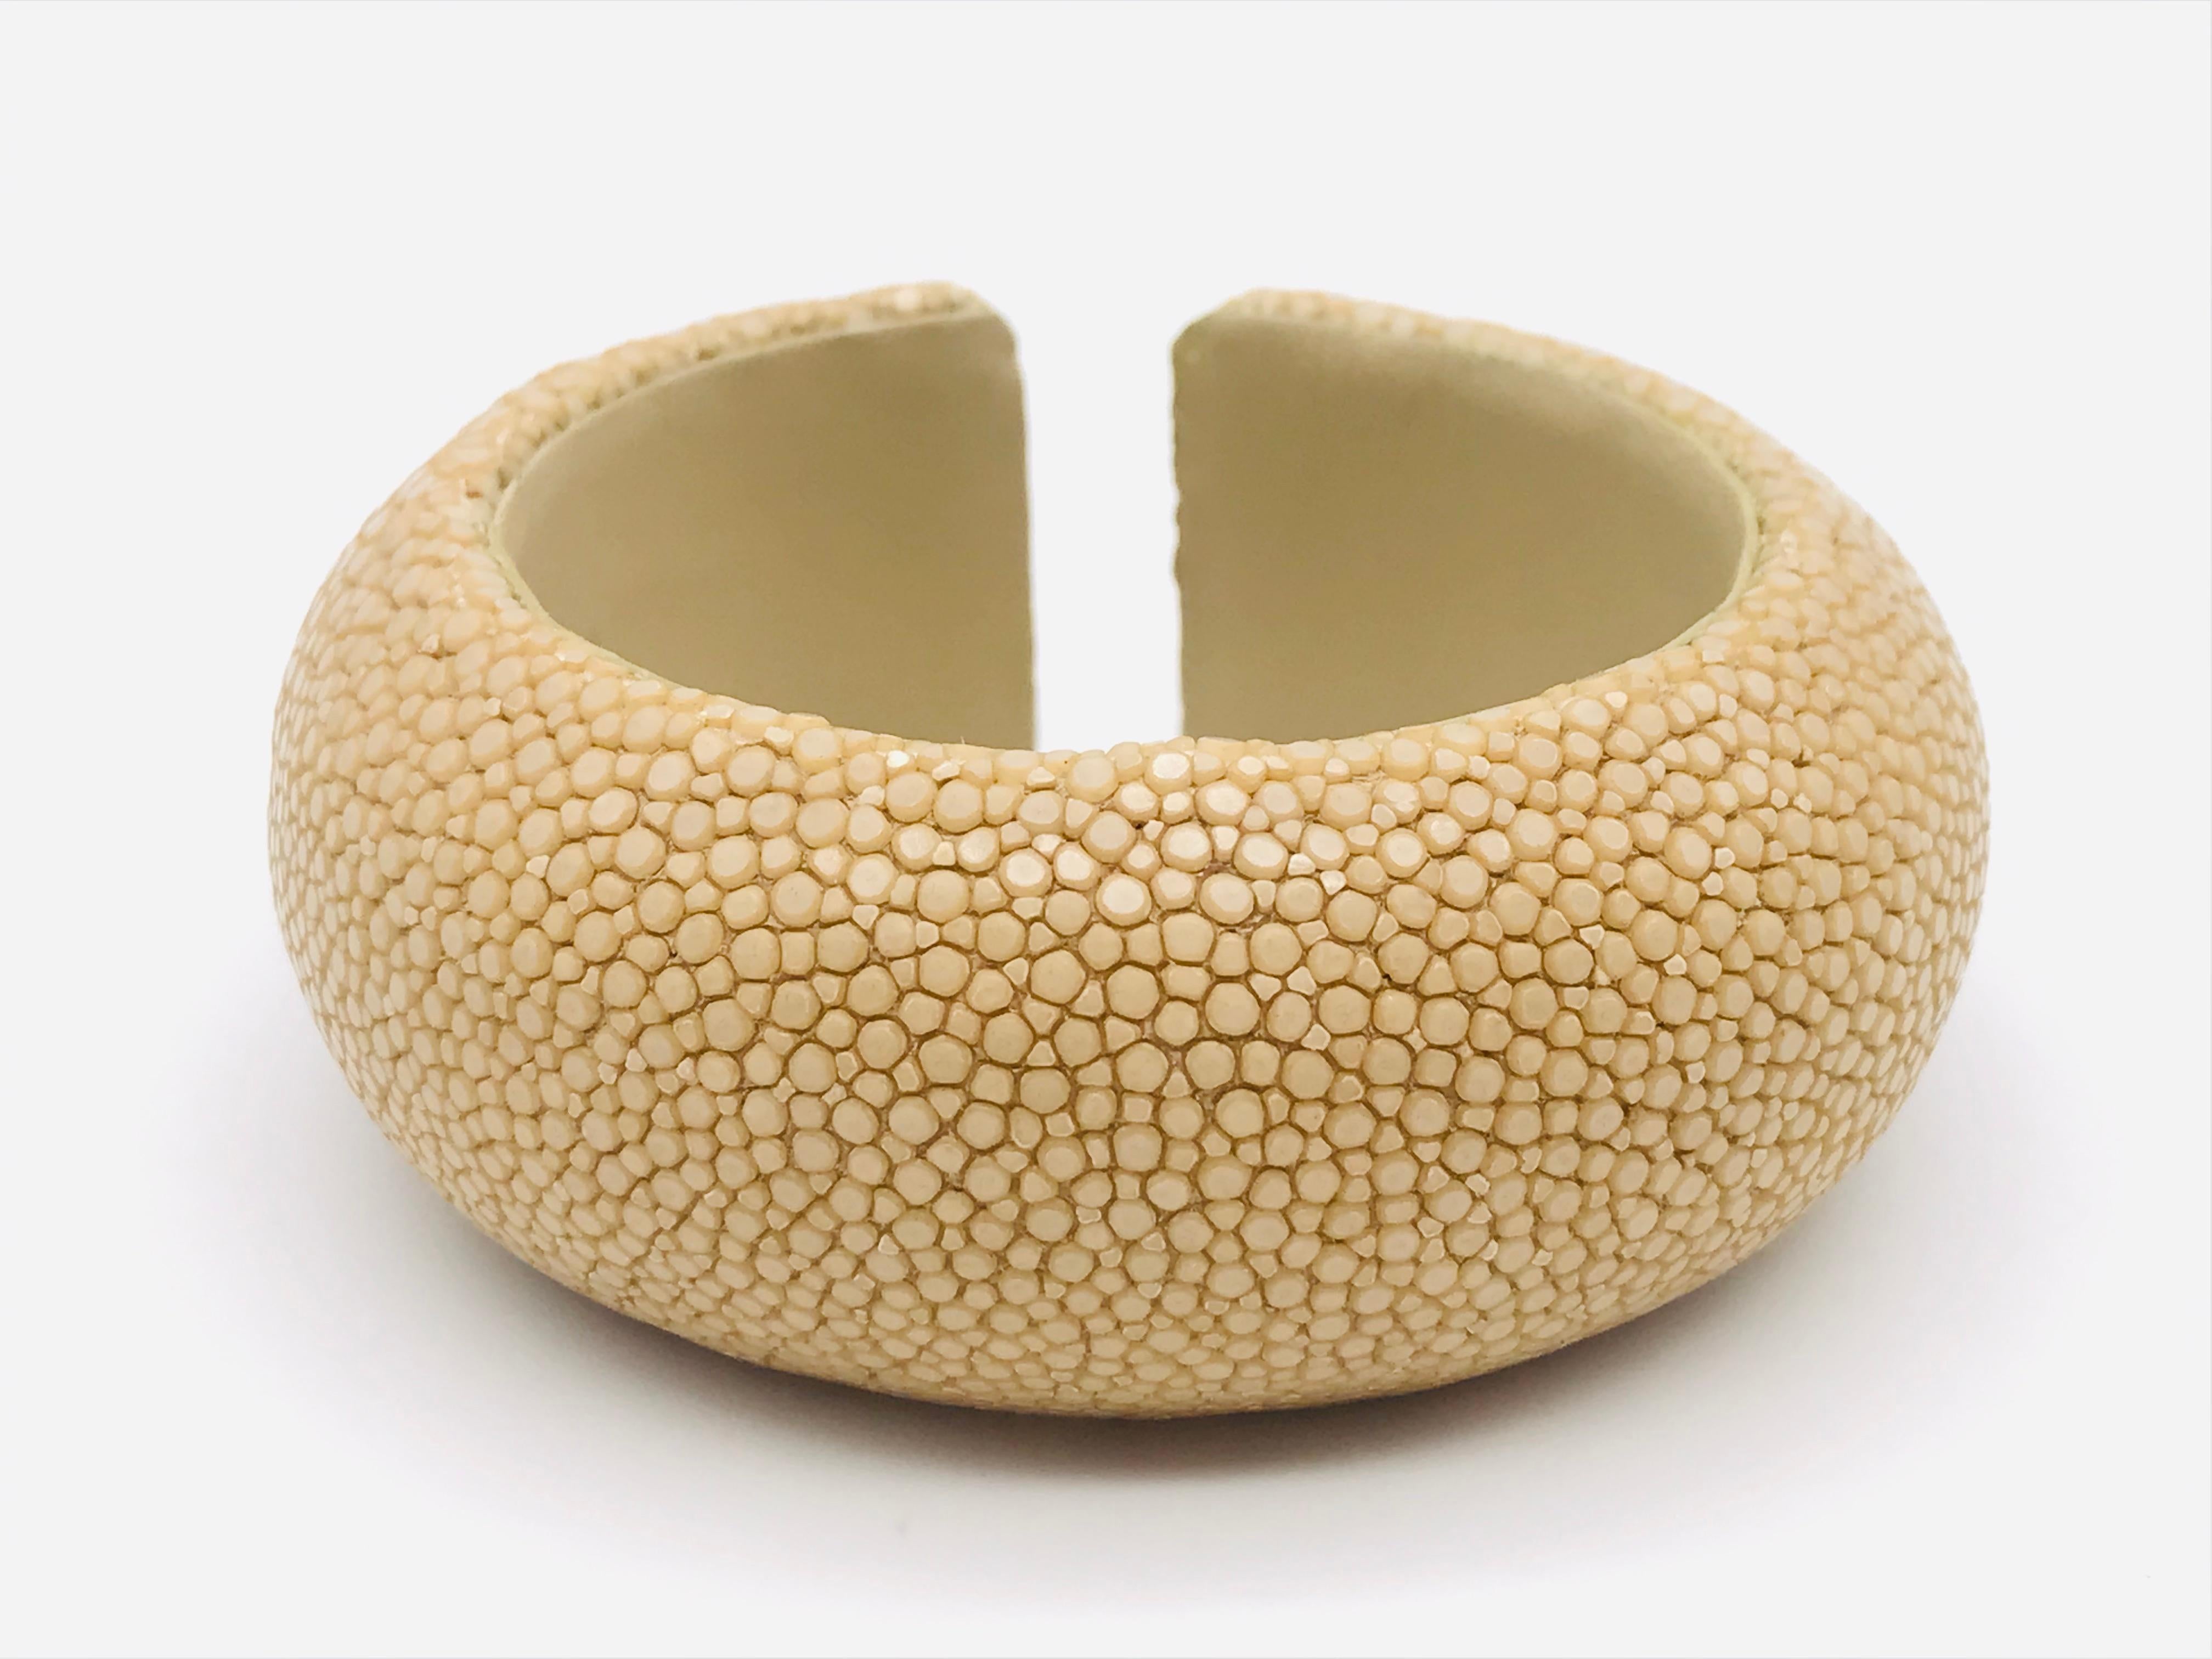 This bracelet is made from stingray leather, which is obtained from the skins of 